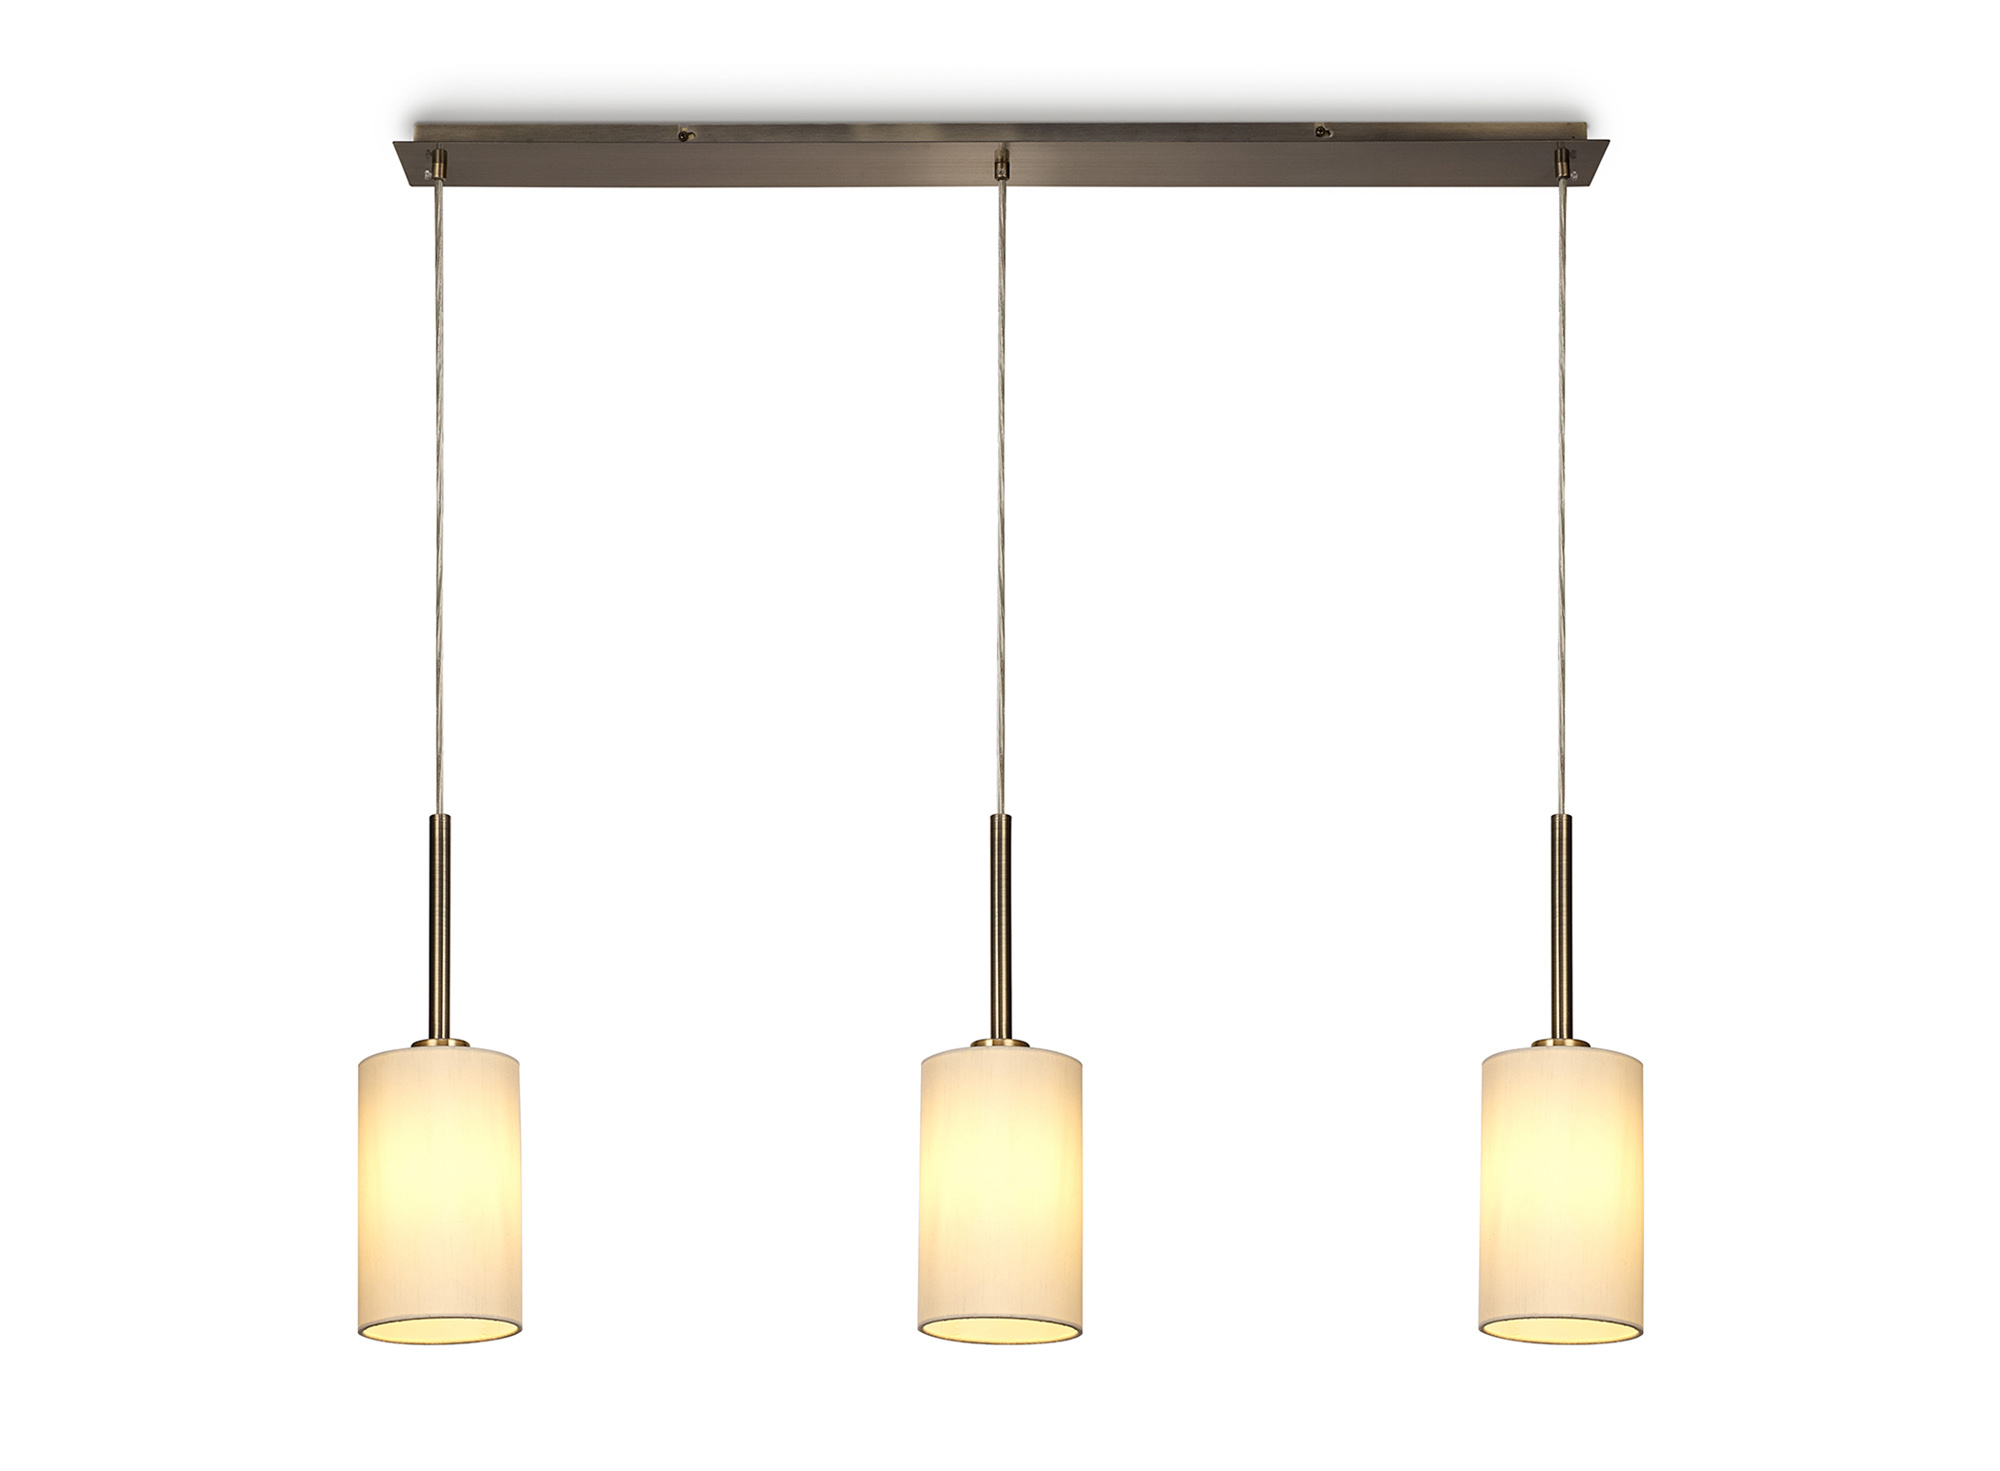 Baymont AB IV Ceiling Lights Deco Linear Fittings